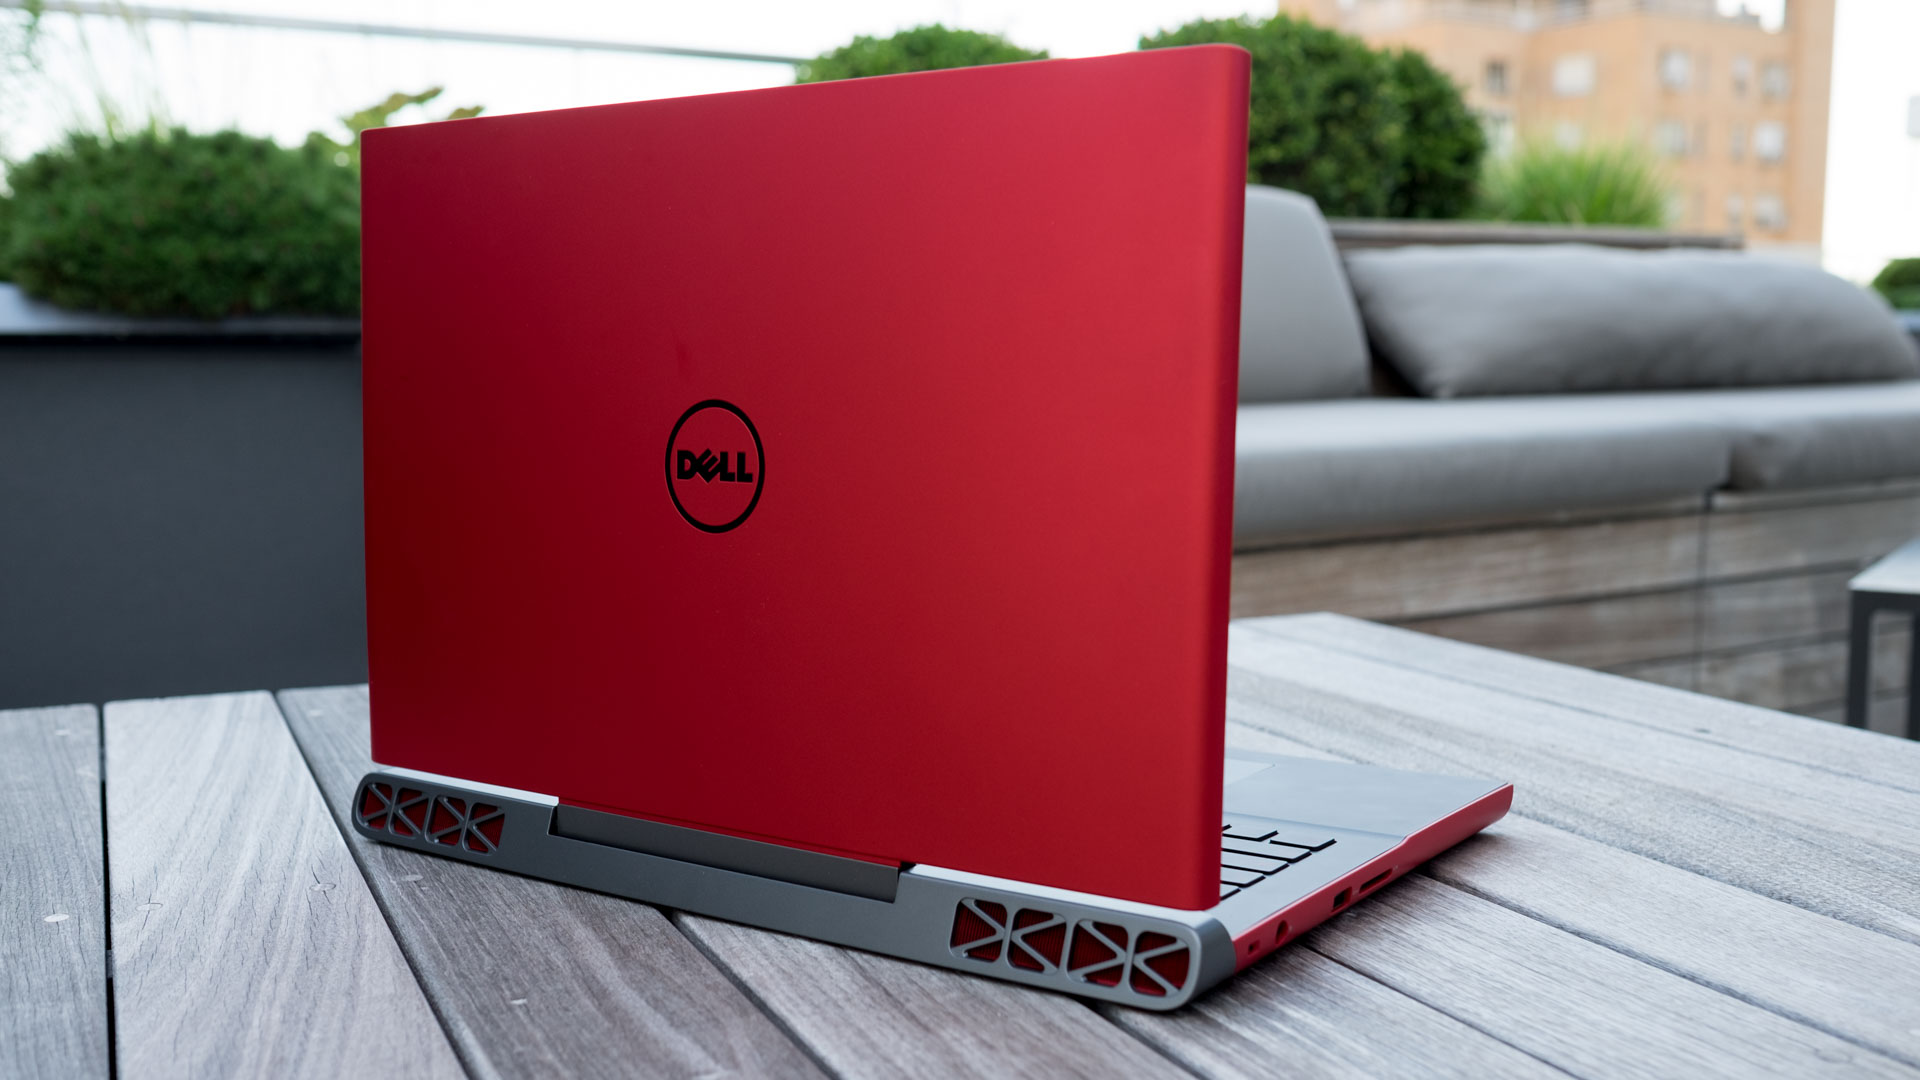 Dell inspiron 15 gaming. Ноутбук dell Inspiron 15. Ноутбук Делл Inspiron 15. Dell Inspiron 15 7000. Dell Inspiron 15 Gaming Laptop.